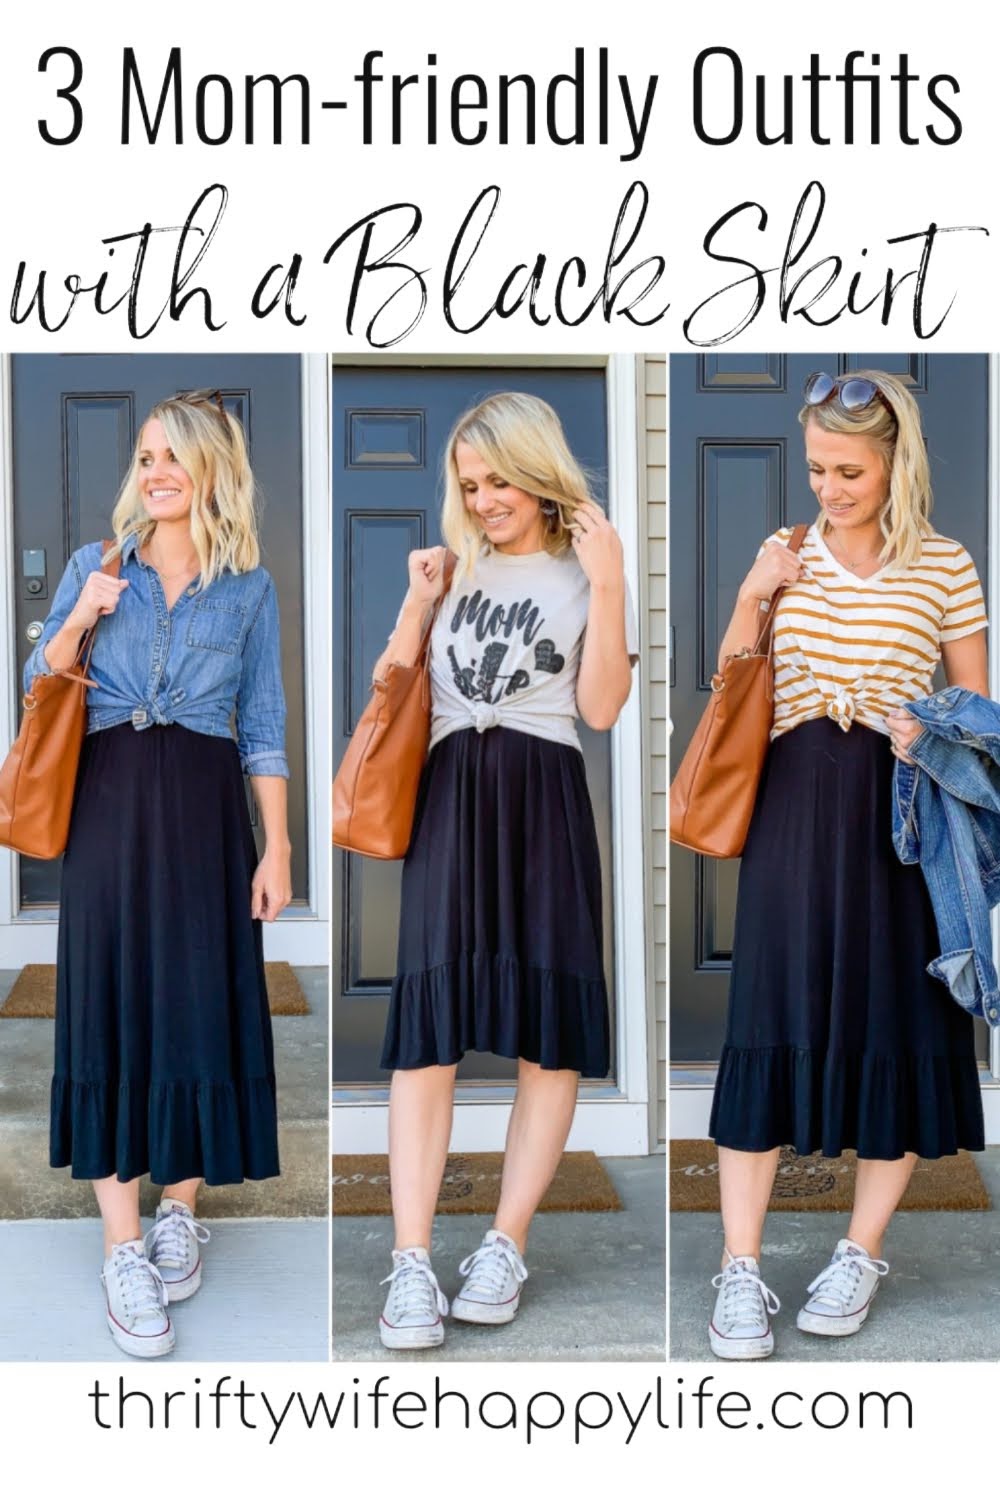 3 Mom-Friendly Outfits with a Black Skirt